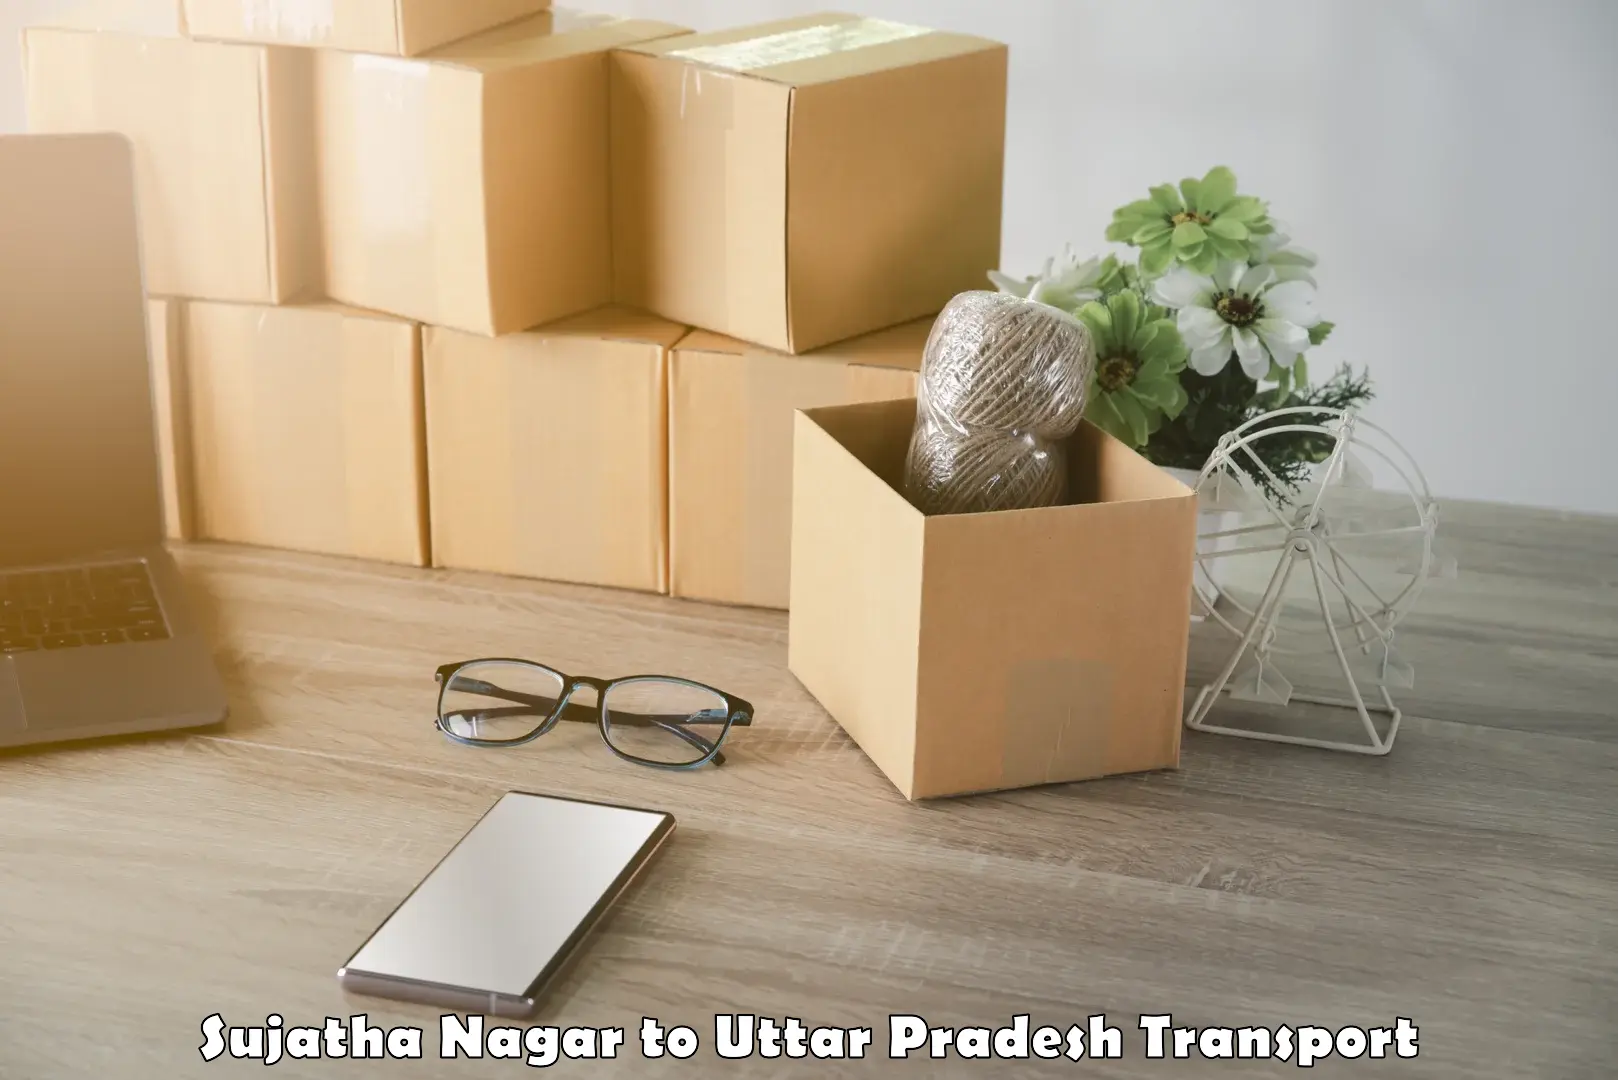 Container transportation services Sujatha Nagar to Lucknow